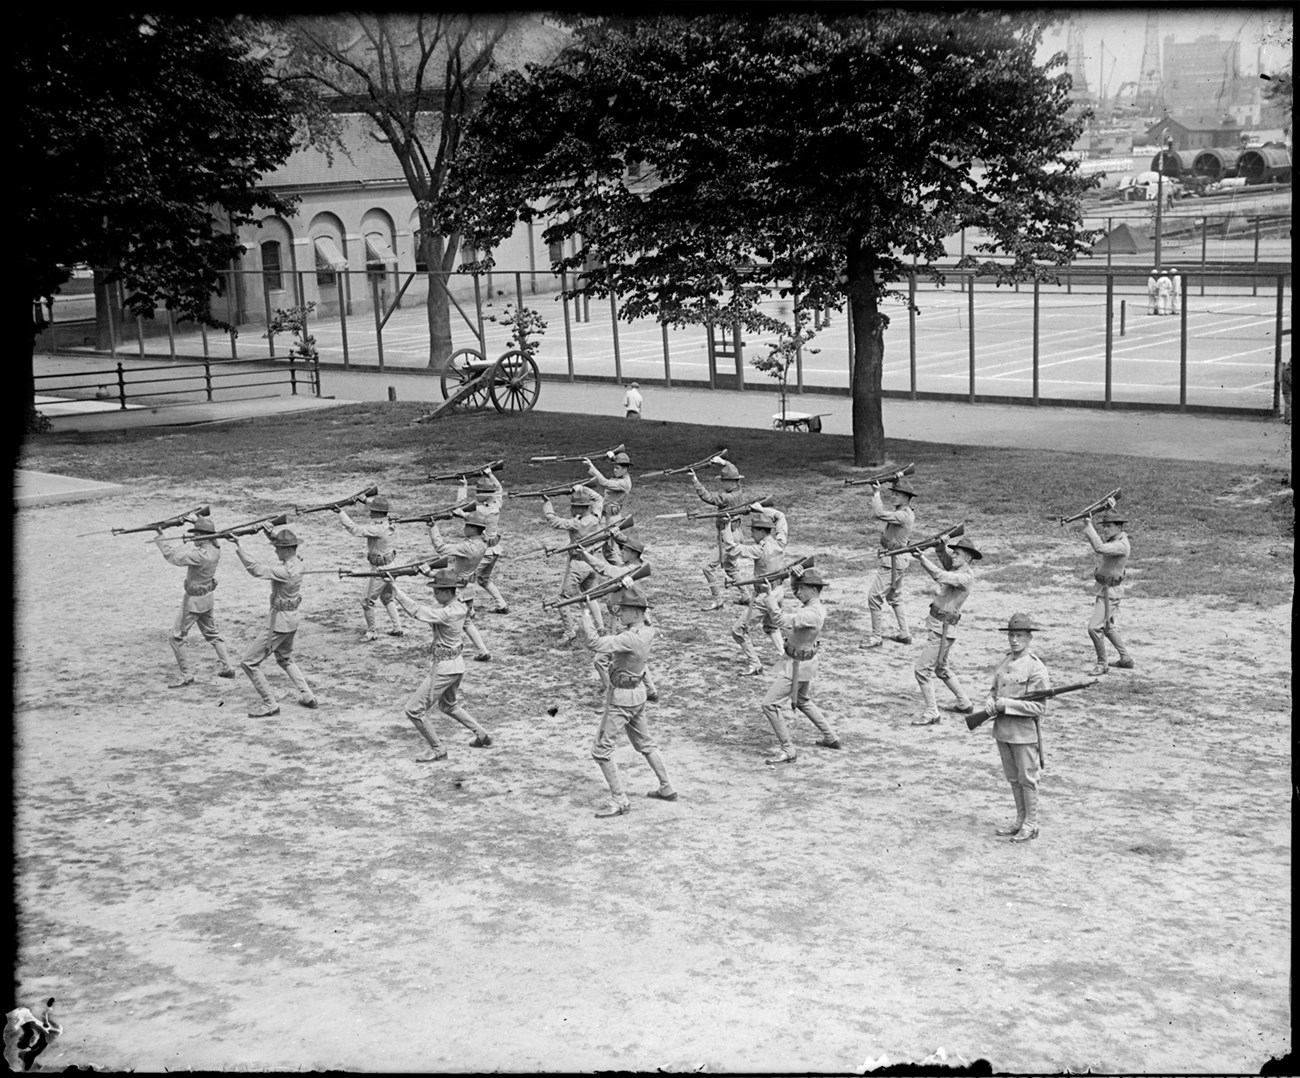 Grid of 16 Marines on a parade ground. They hold bayonets over their heads as an officer watches.